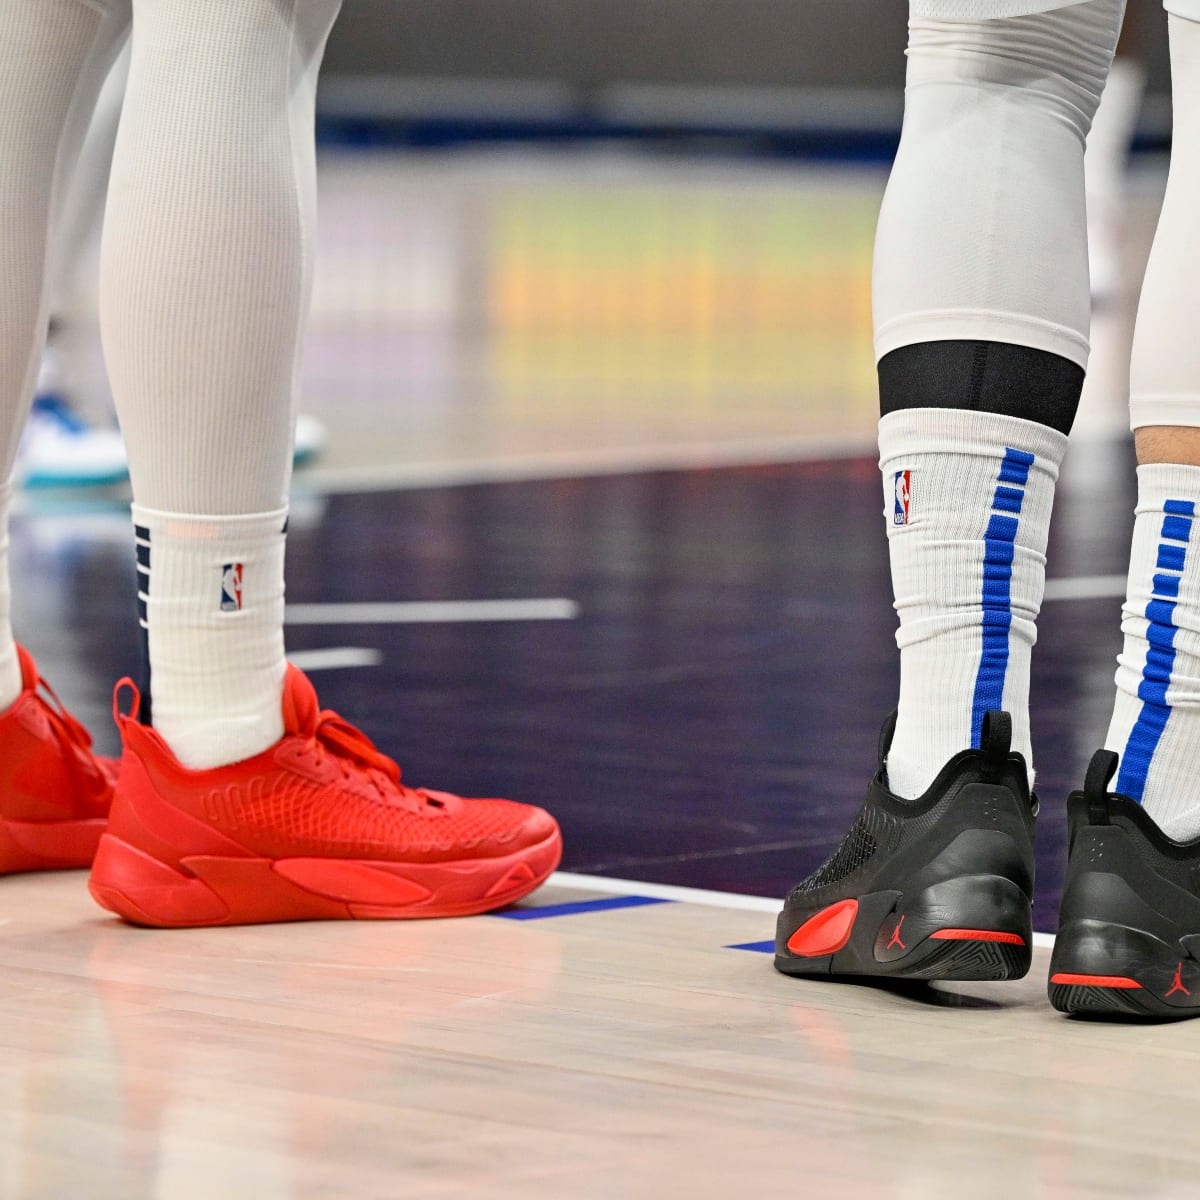 Luka Doncic's Signature Shoes Are Taking Over Basketball